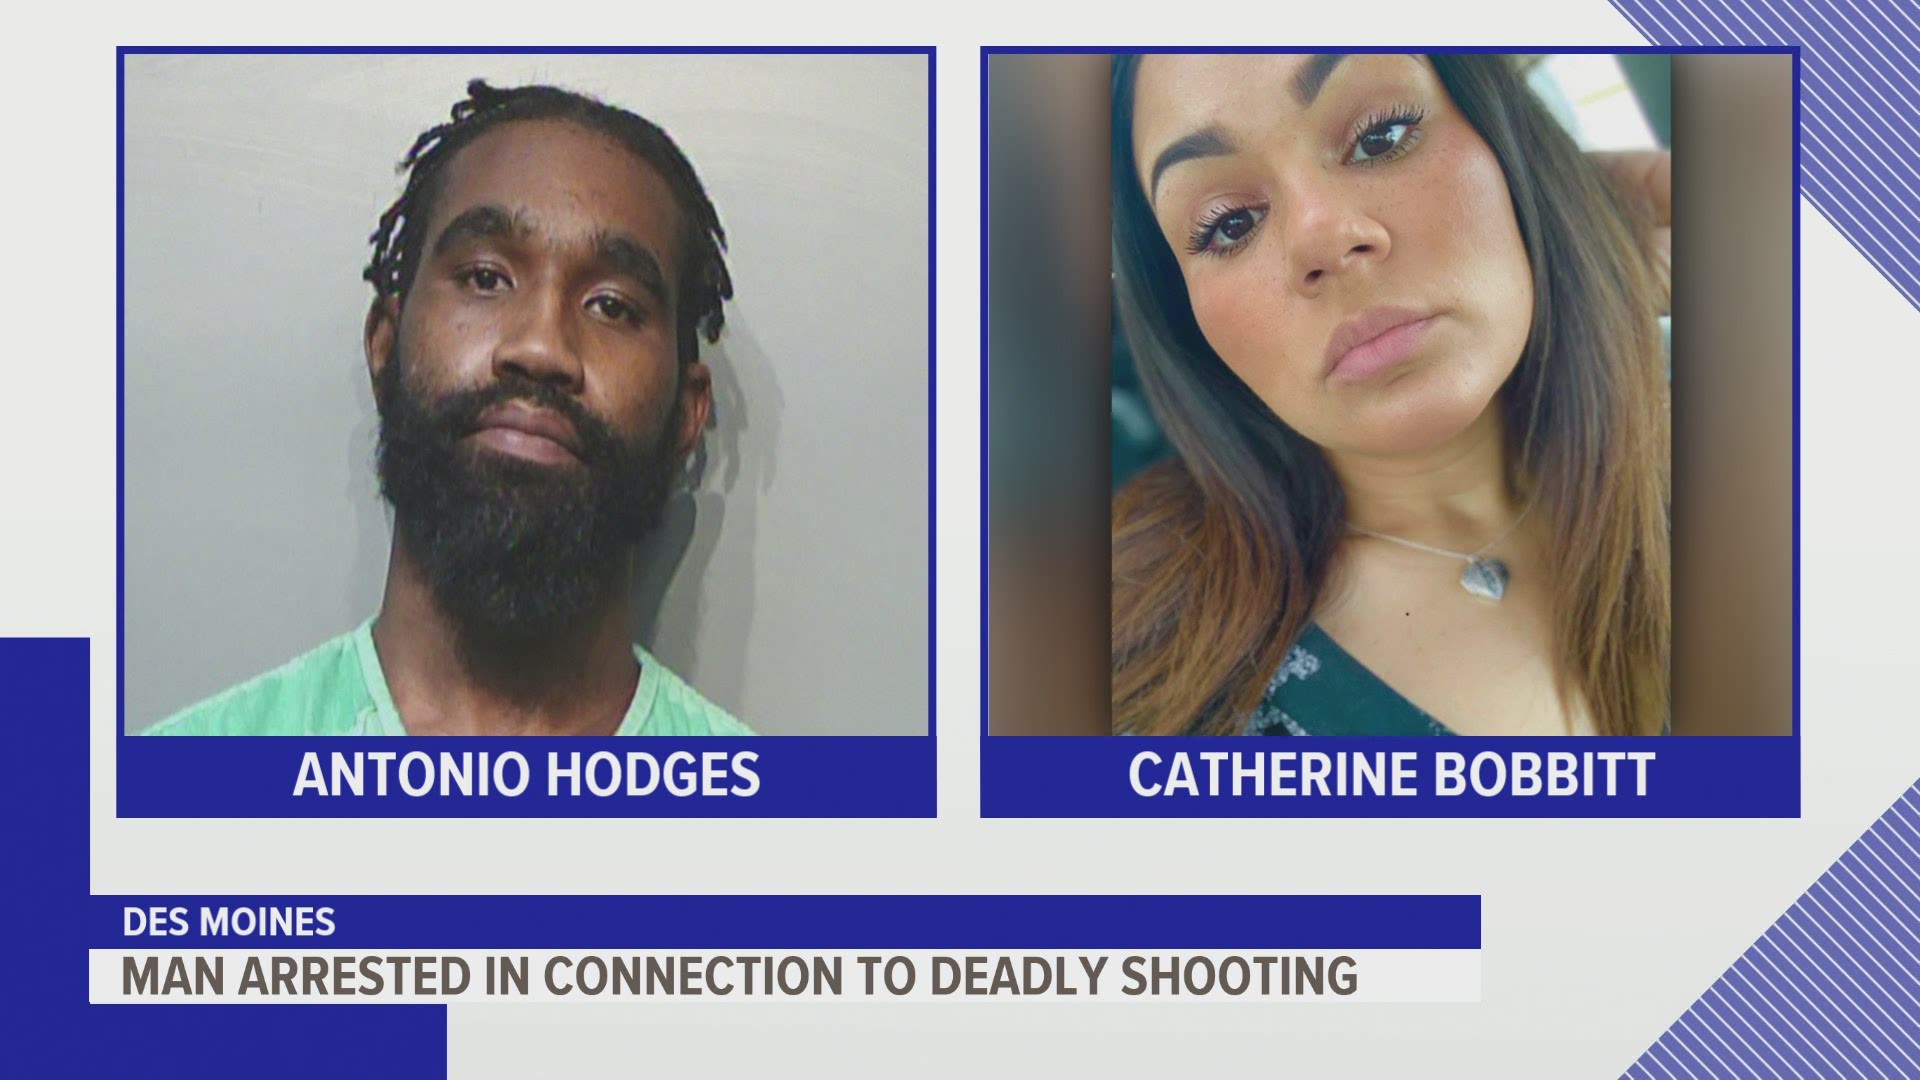 Antonio Markez Hodges has been charged with first-degree murder and intimidation with a dangerous weapon in the death of 33-year-old Catherine Bobbitt.